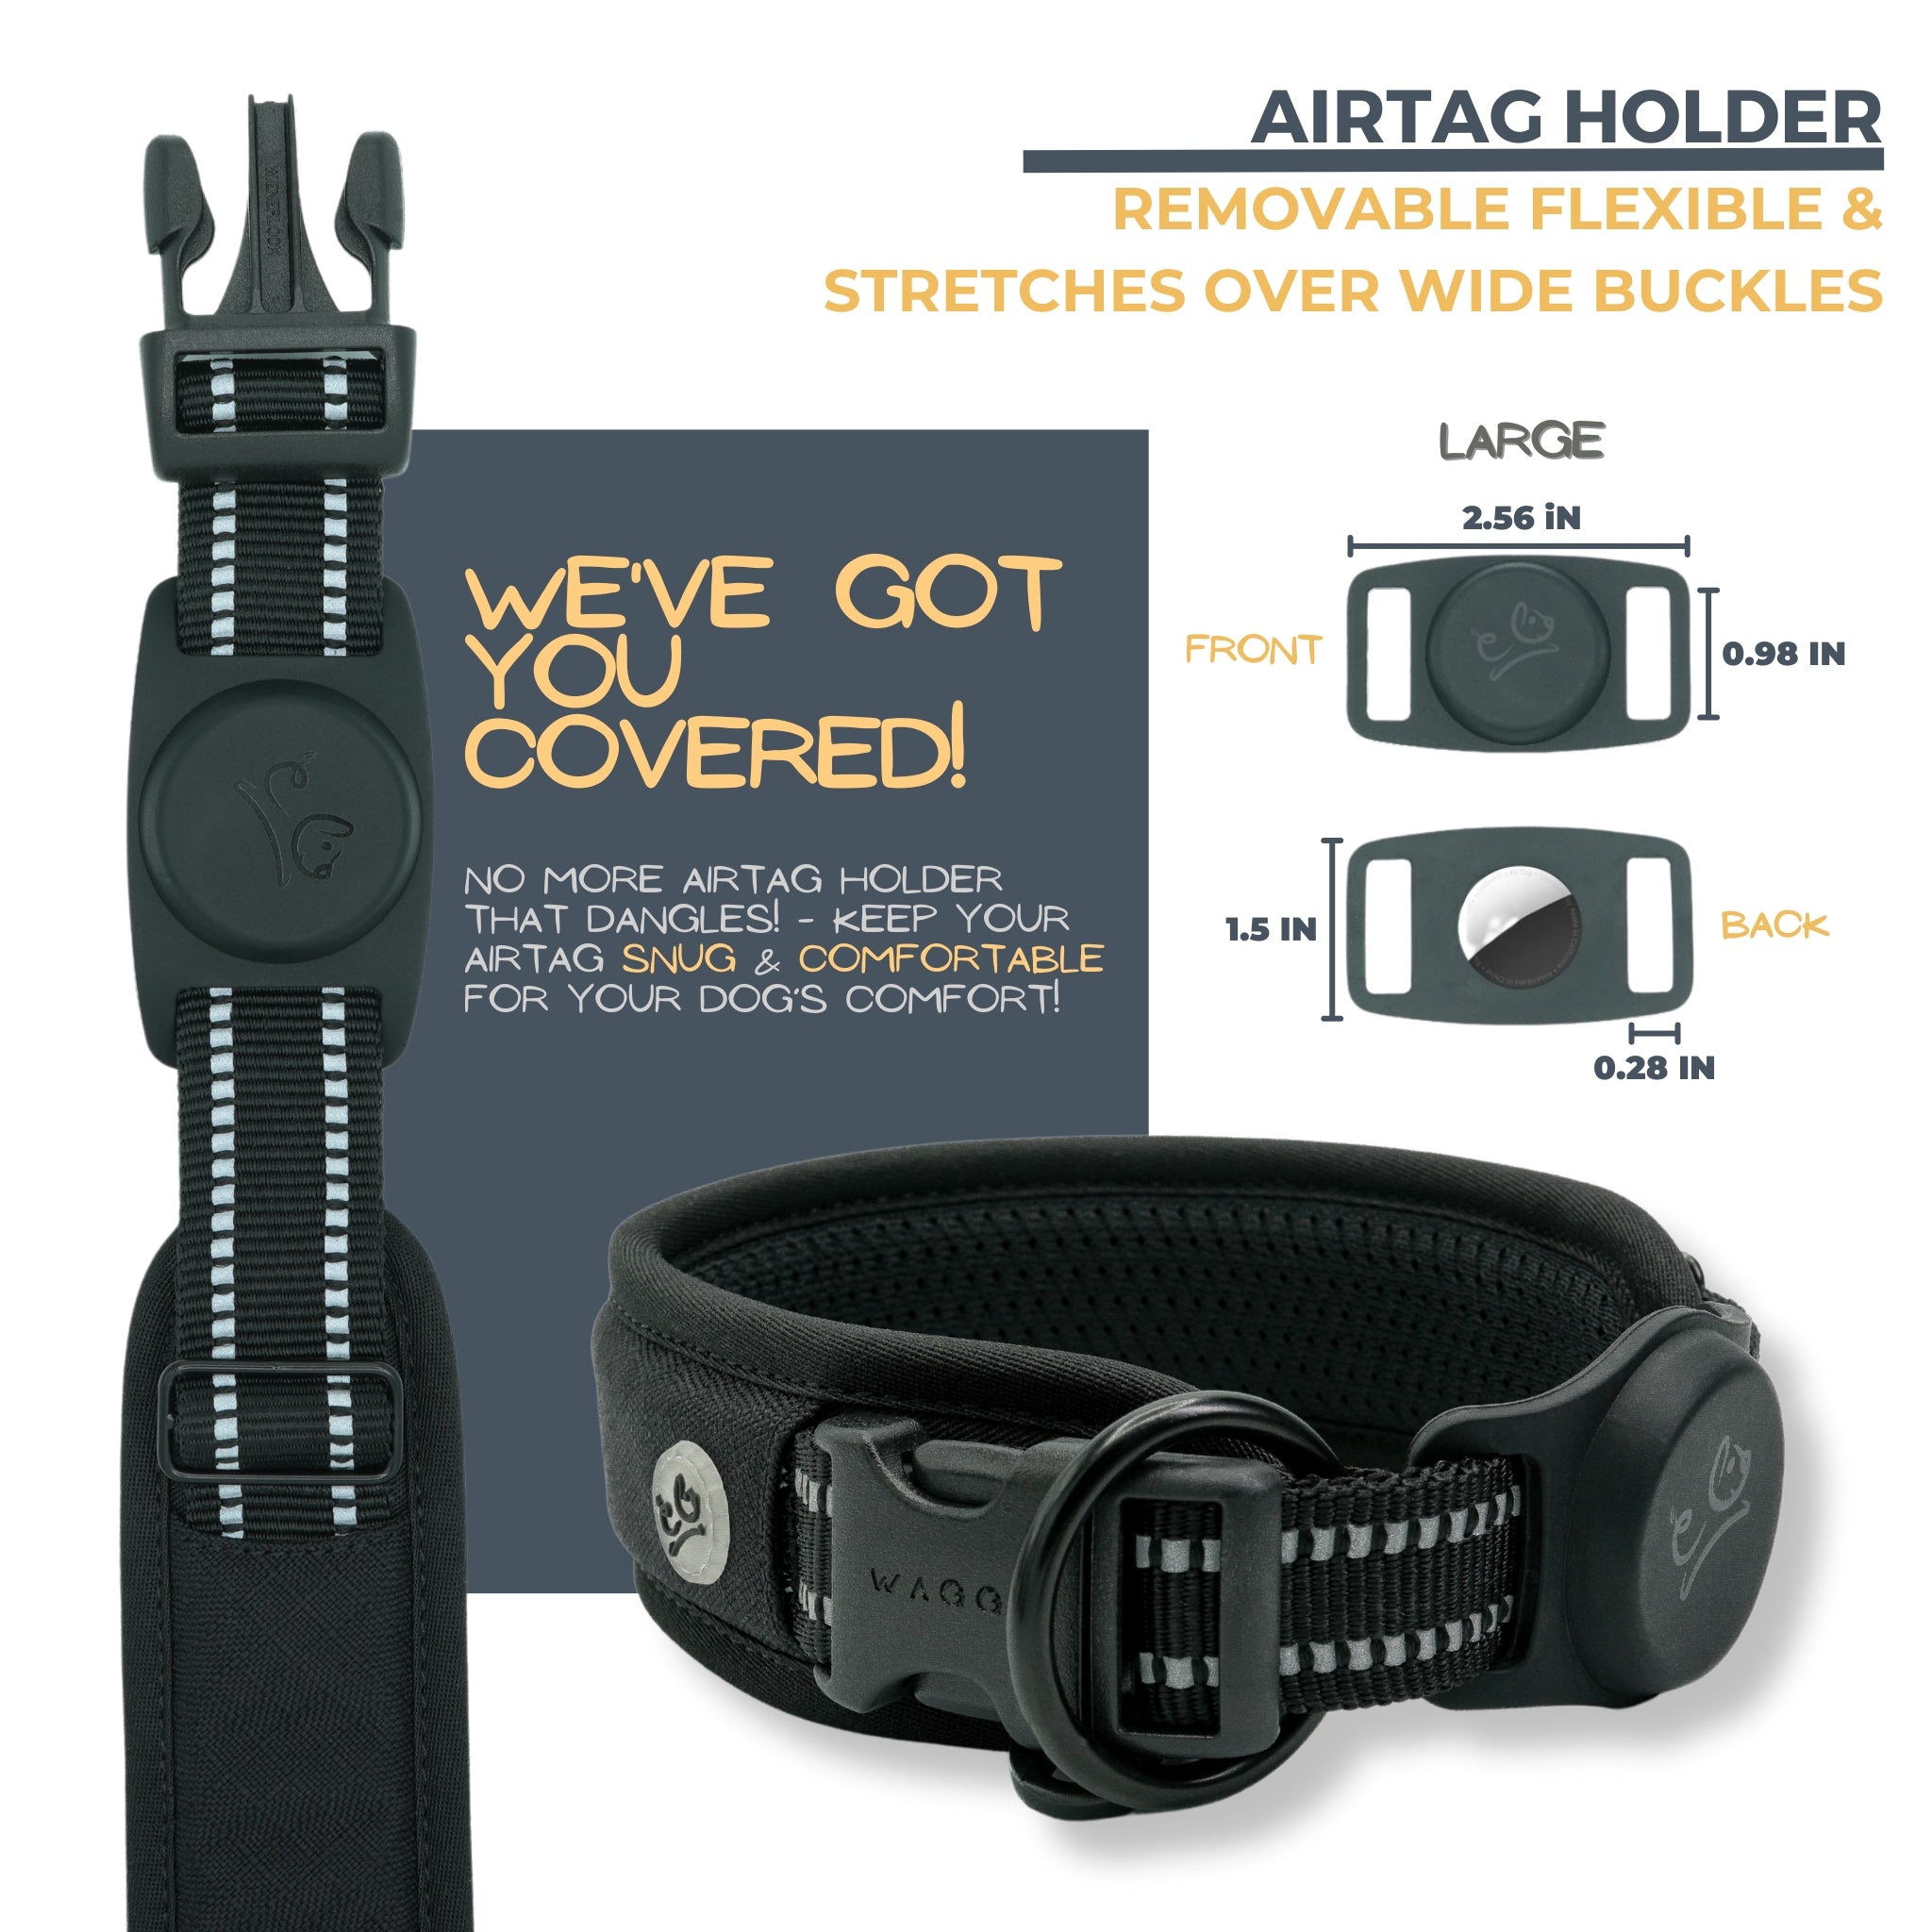 Black Air Mesh dog collar Airtag holder details. Removable; flexible; stretches over wide buckles. Airtag Holder exact measurements and shows a black collar with Airtag holder. No more Airtag holder that dangles. Airtag is to be snug &amp; comfortable for your dog&#39;s comfort.